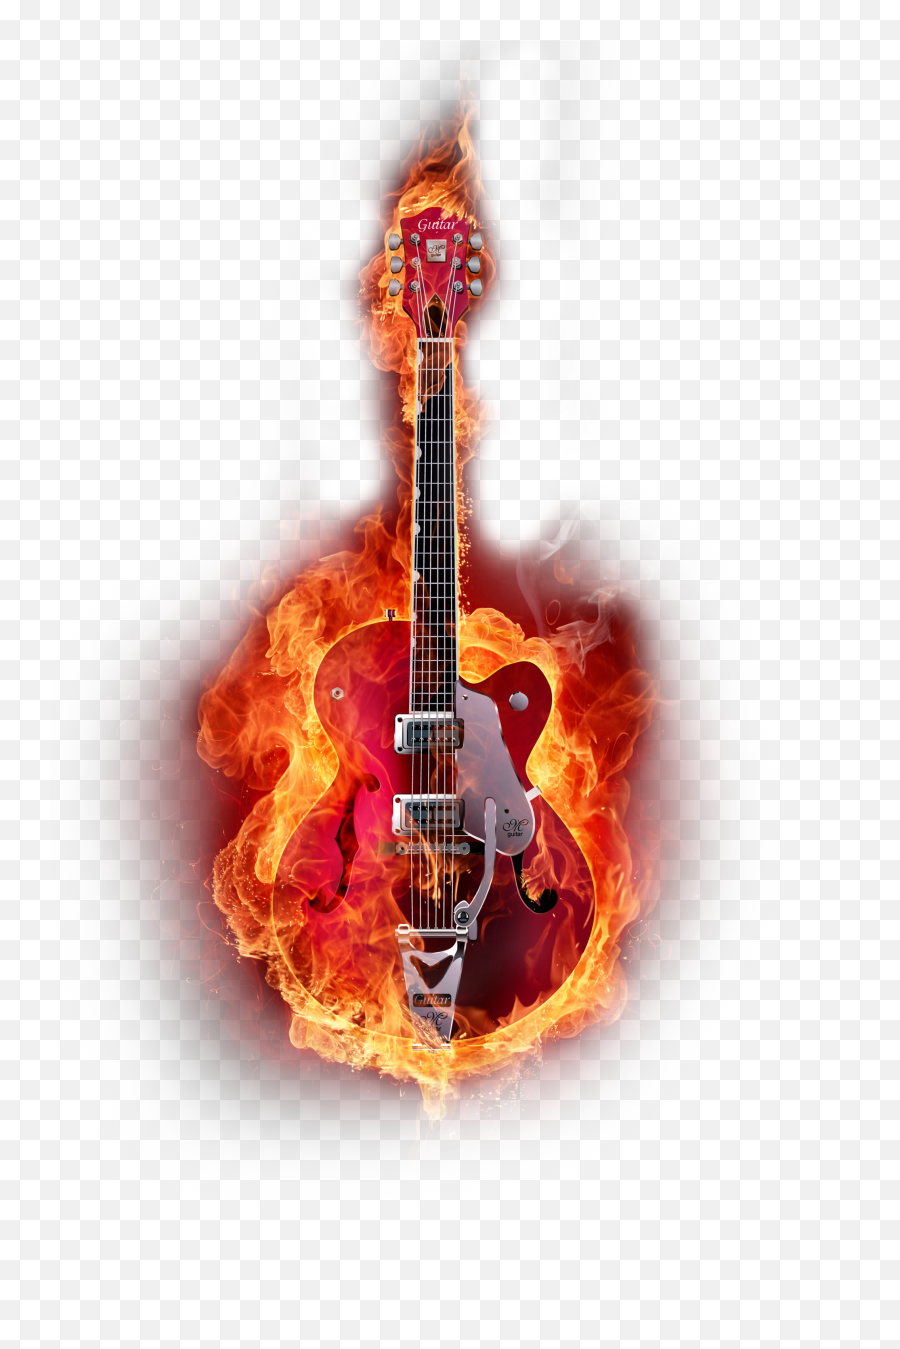 Graphic Instruments Guitar Design Flame - Guitar Photo With Fire Emoji,Musical Clipart